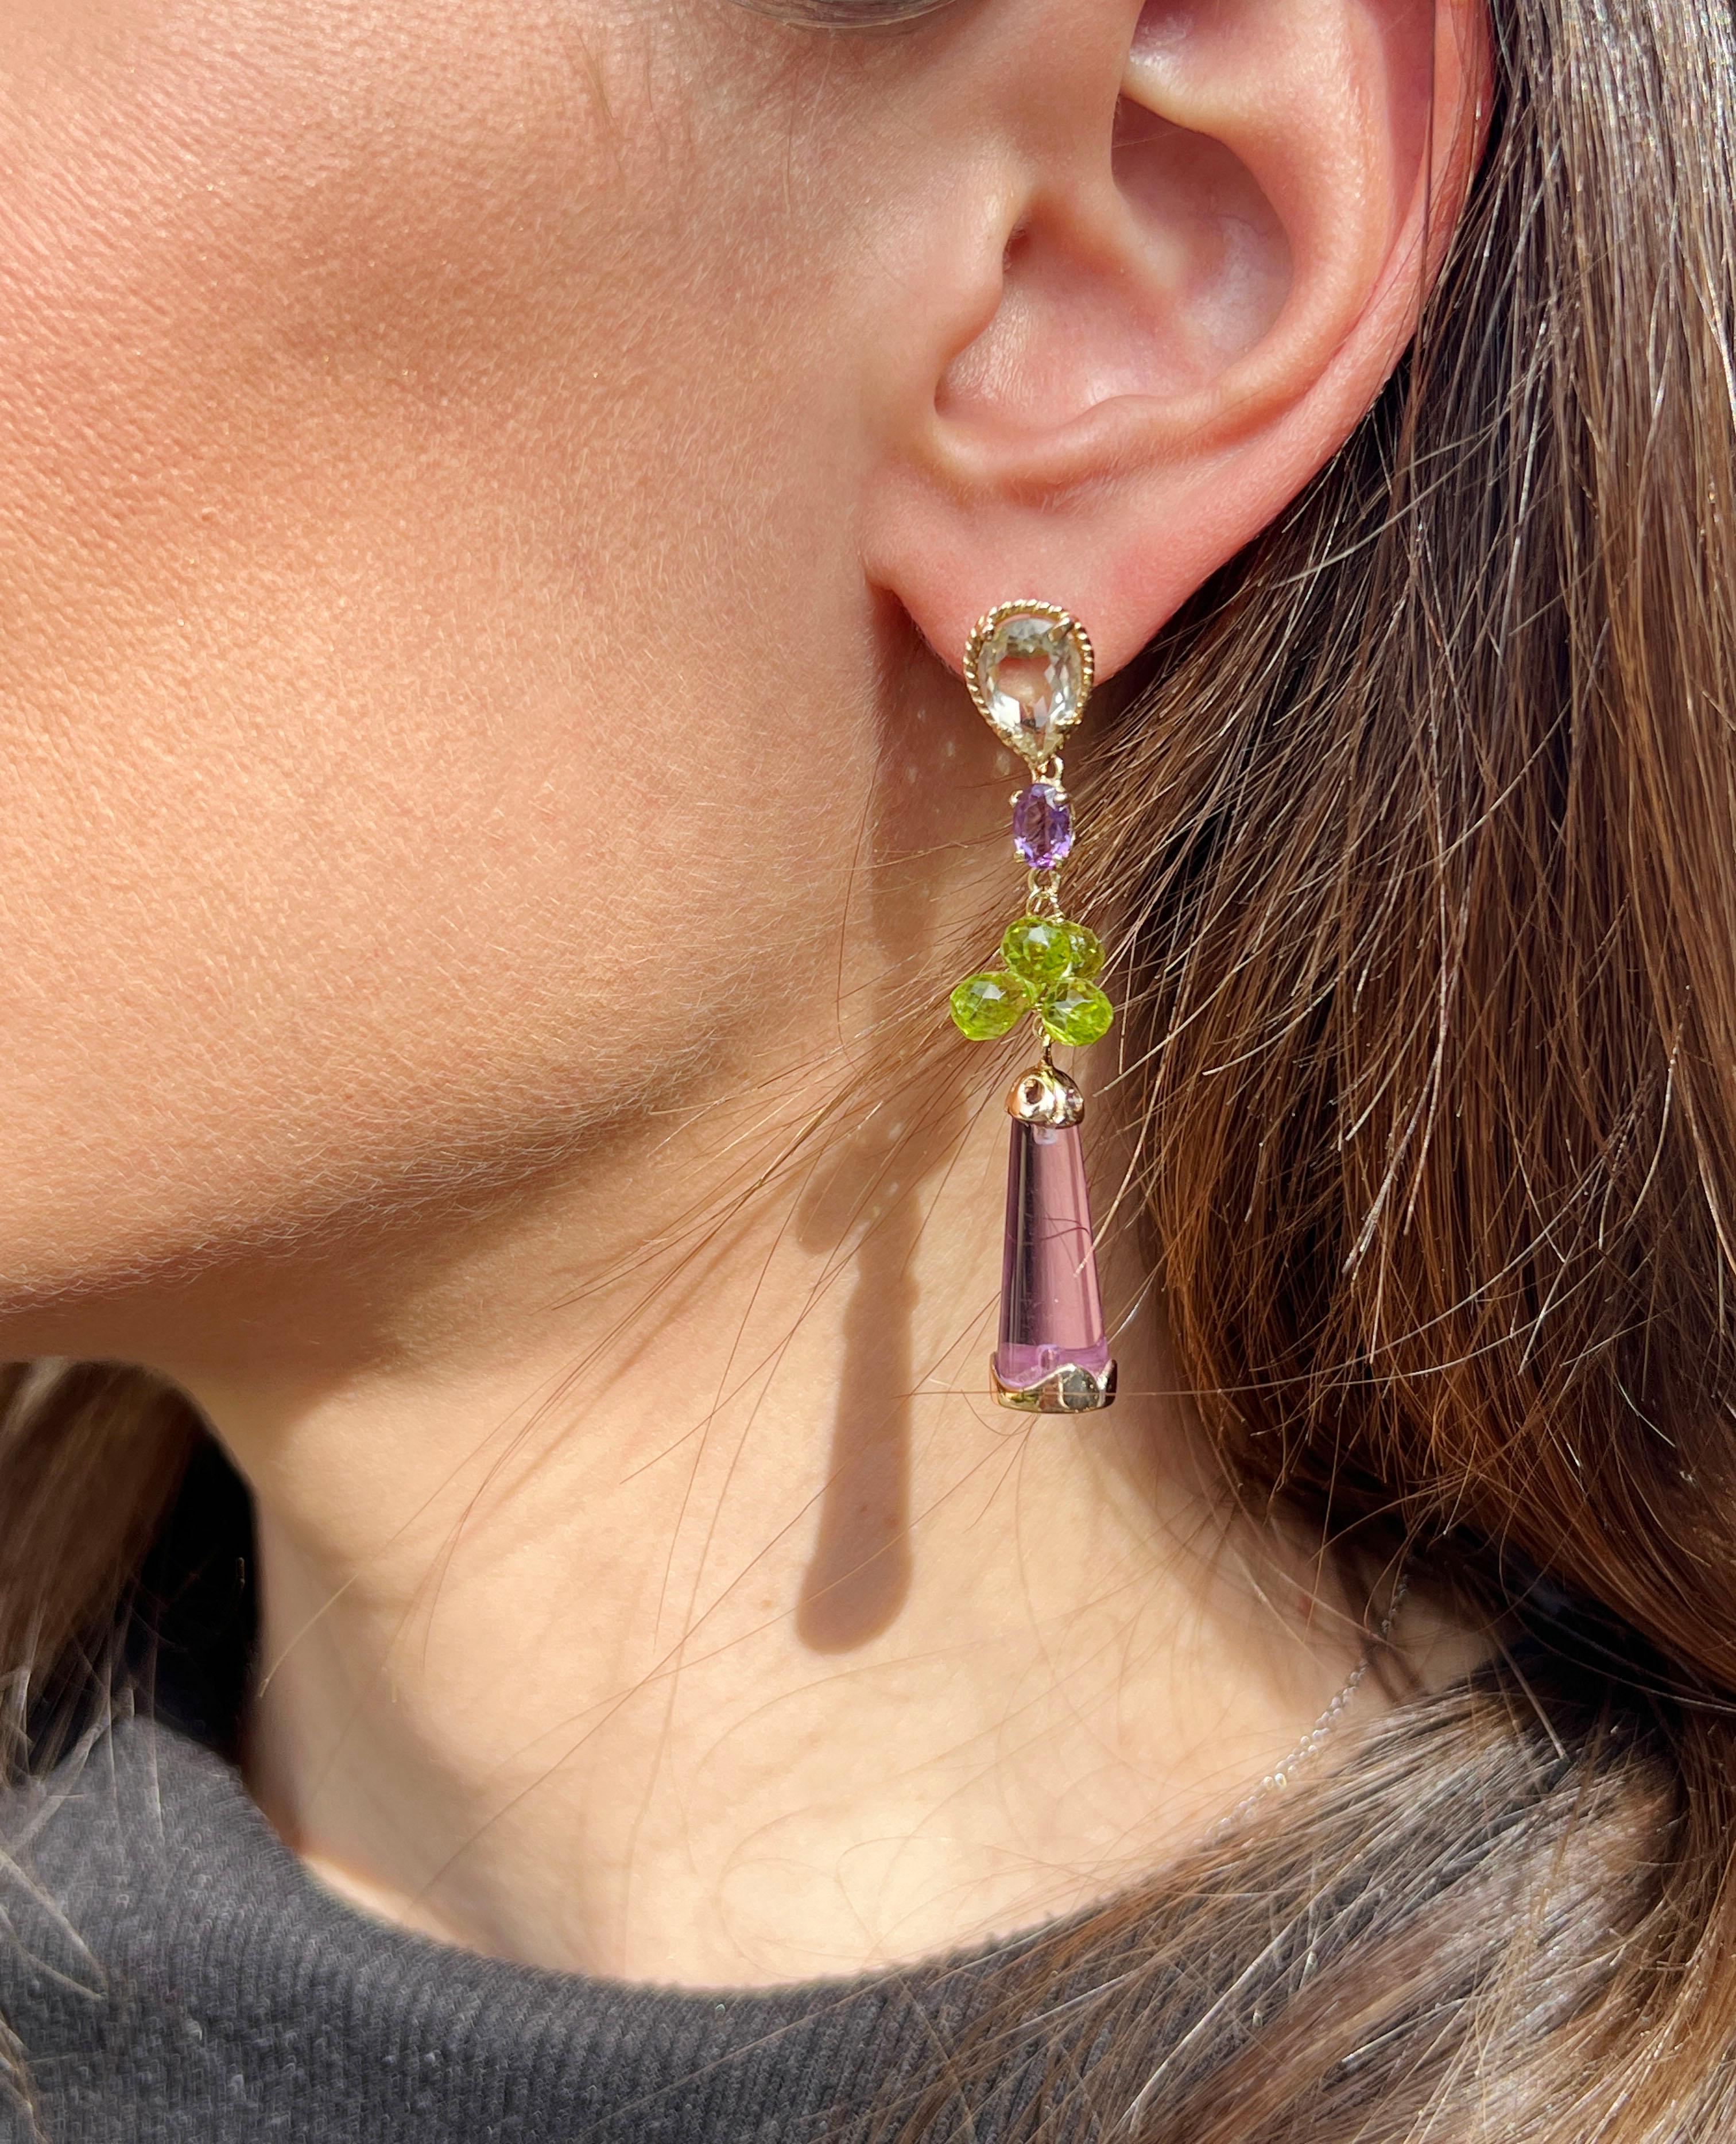 Special earrings with differents shapes with amethyst, peridot  and lemon quartz. Special earrings with differents shapes with blue topaz and lemon quartz
Don't you love the earrings ? We love them very much, we love the colour . Gorgeous earrings